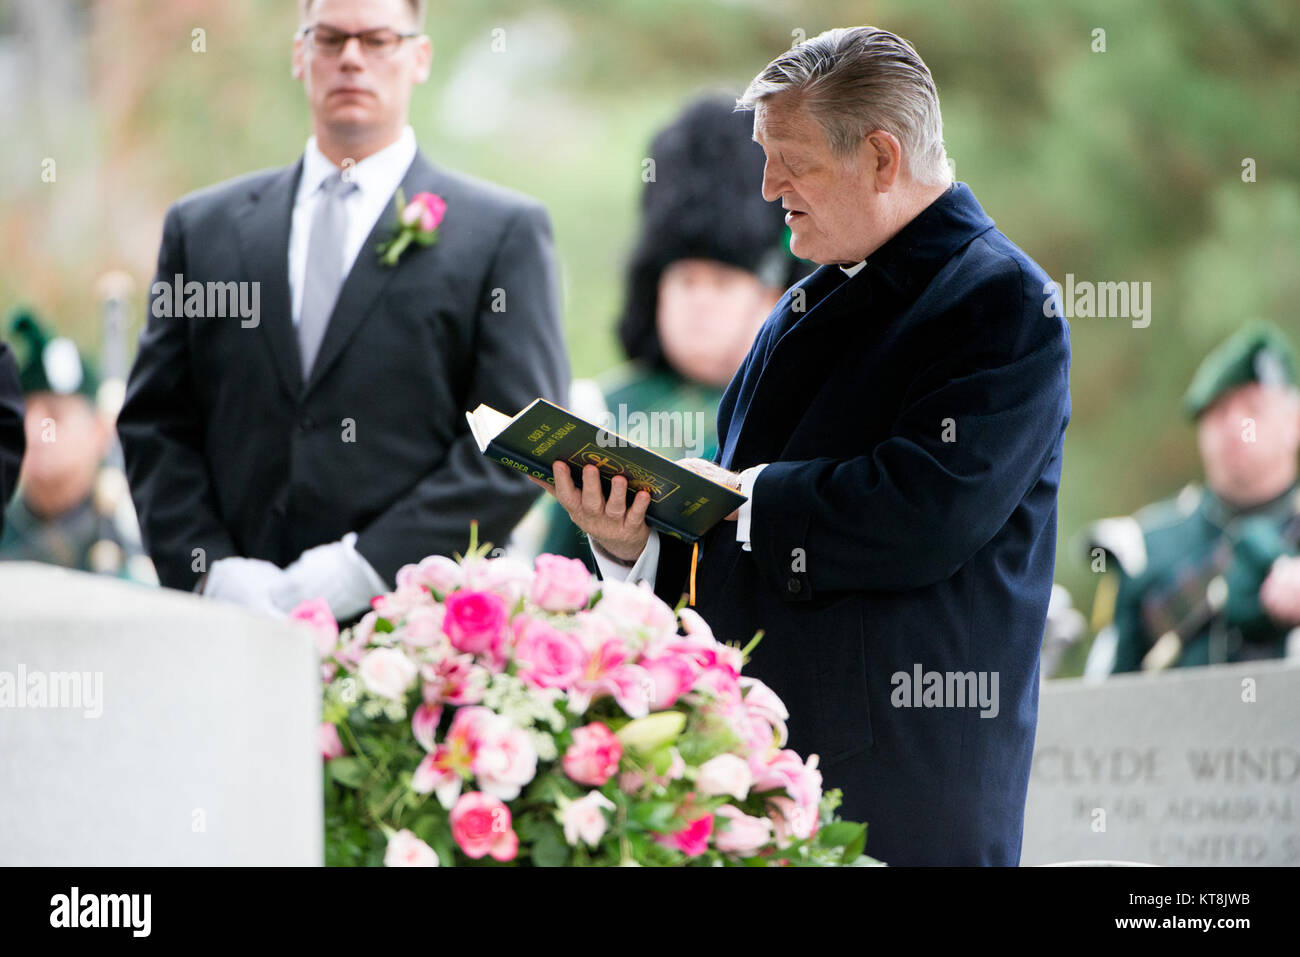 Father Gerald Weymes conducts the graveside service for Maureen Fitzsimons Blair, also known as Maureen O’Hara, in Section 2 of Arlington National Cemetery, Nov. 9, 2015. She is being buried with her husband U.S. Air Force Brig. Gen Charles Blair. Stock Photo